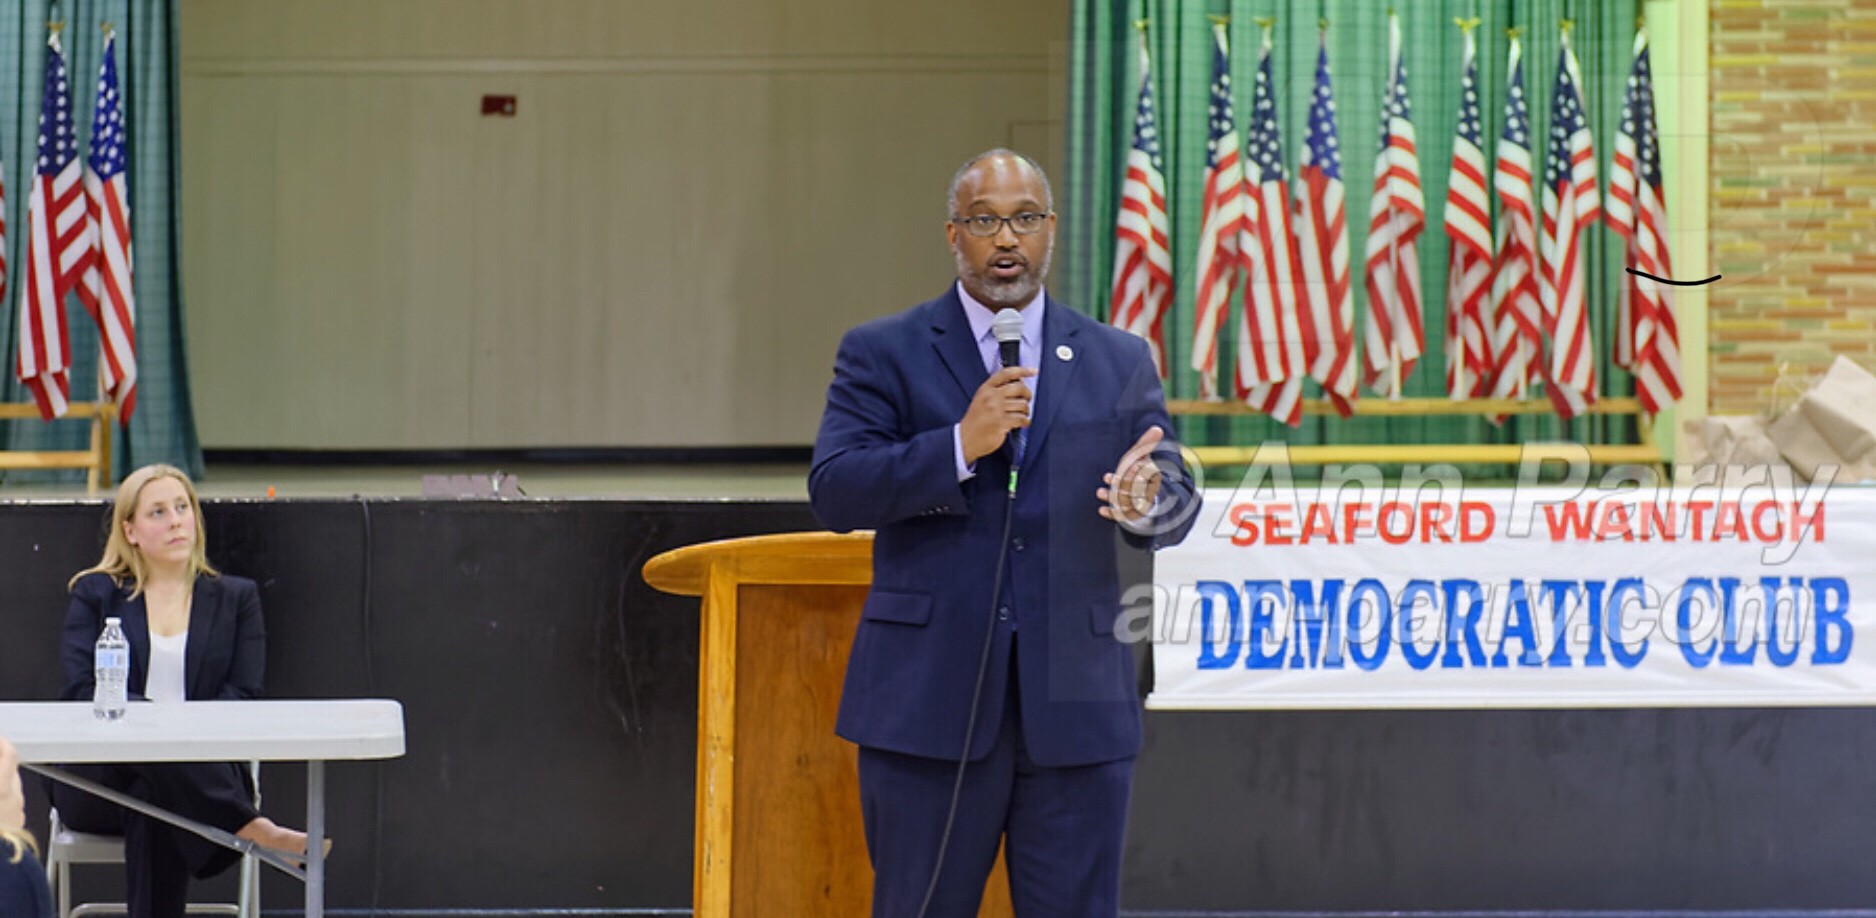 Levittown, NY, USA. June 4, 2018. Candidate Suffolk County Legislator DuWayne Gregory speaks during Congressional District 2 Democratic primary debate with Liuba Grechen Shirley held by Seaford Wantagh Democratic Club at Levittown Hall.